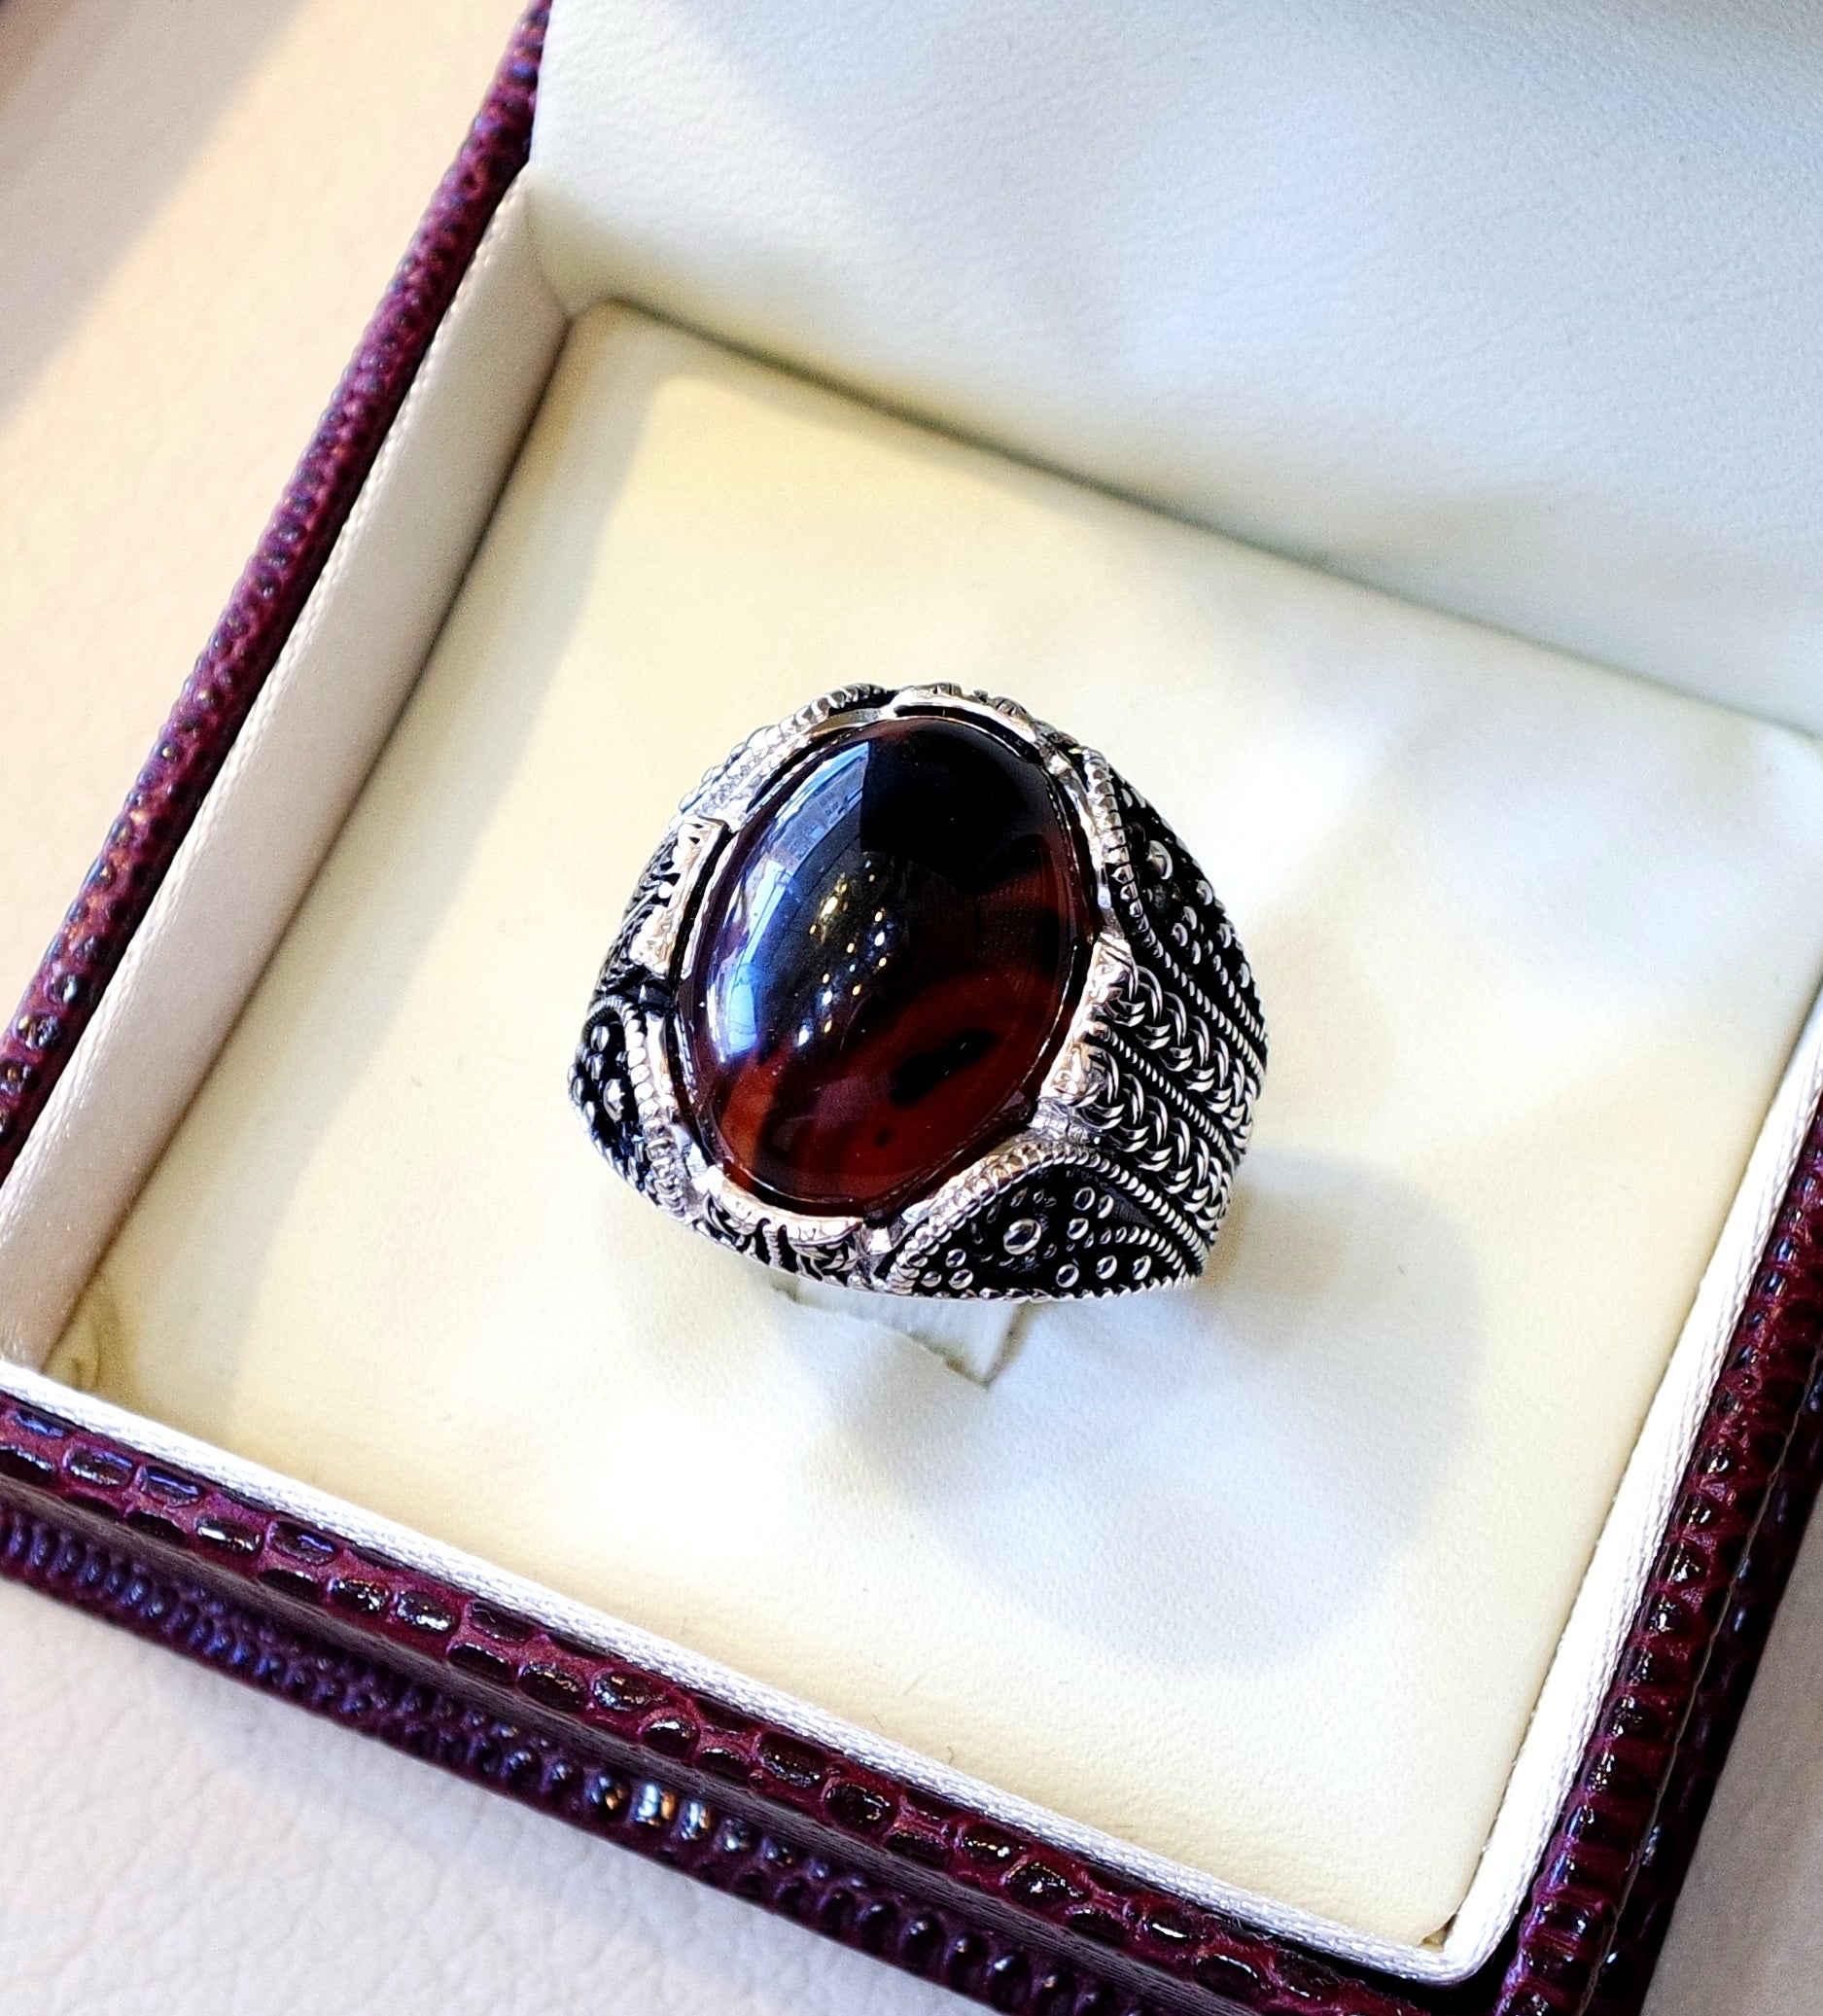 dark lace agate aqeeq liver red and black semi precious stunning gorgeous natural stone ring sterling silver 925 all sizes jewelry